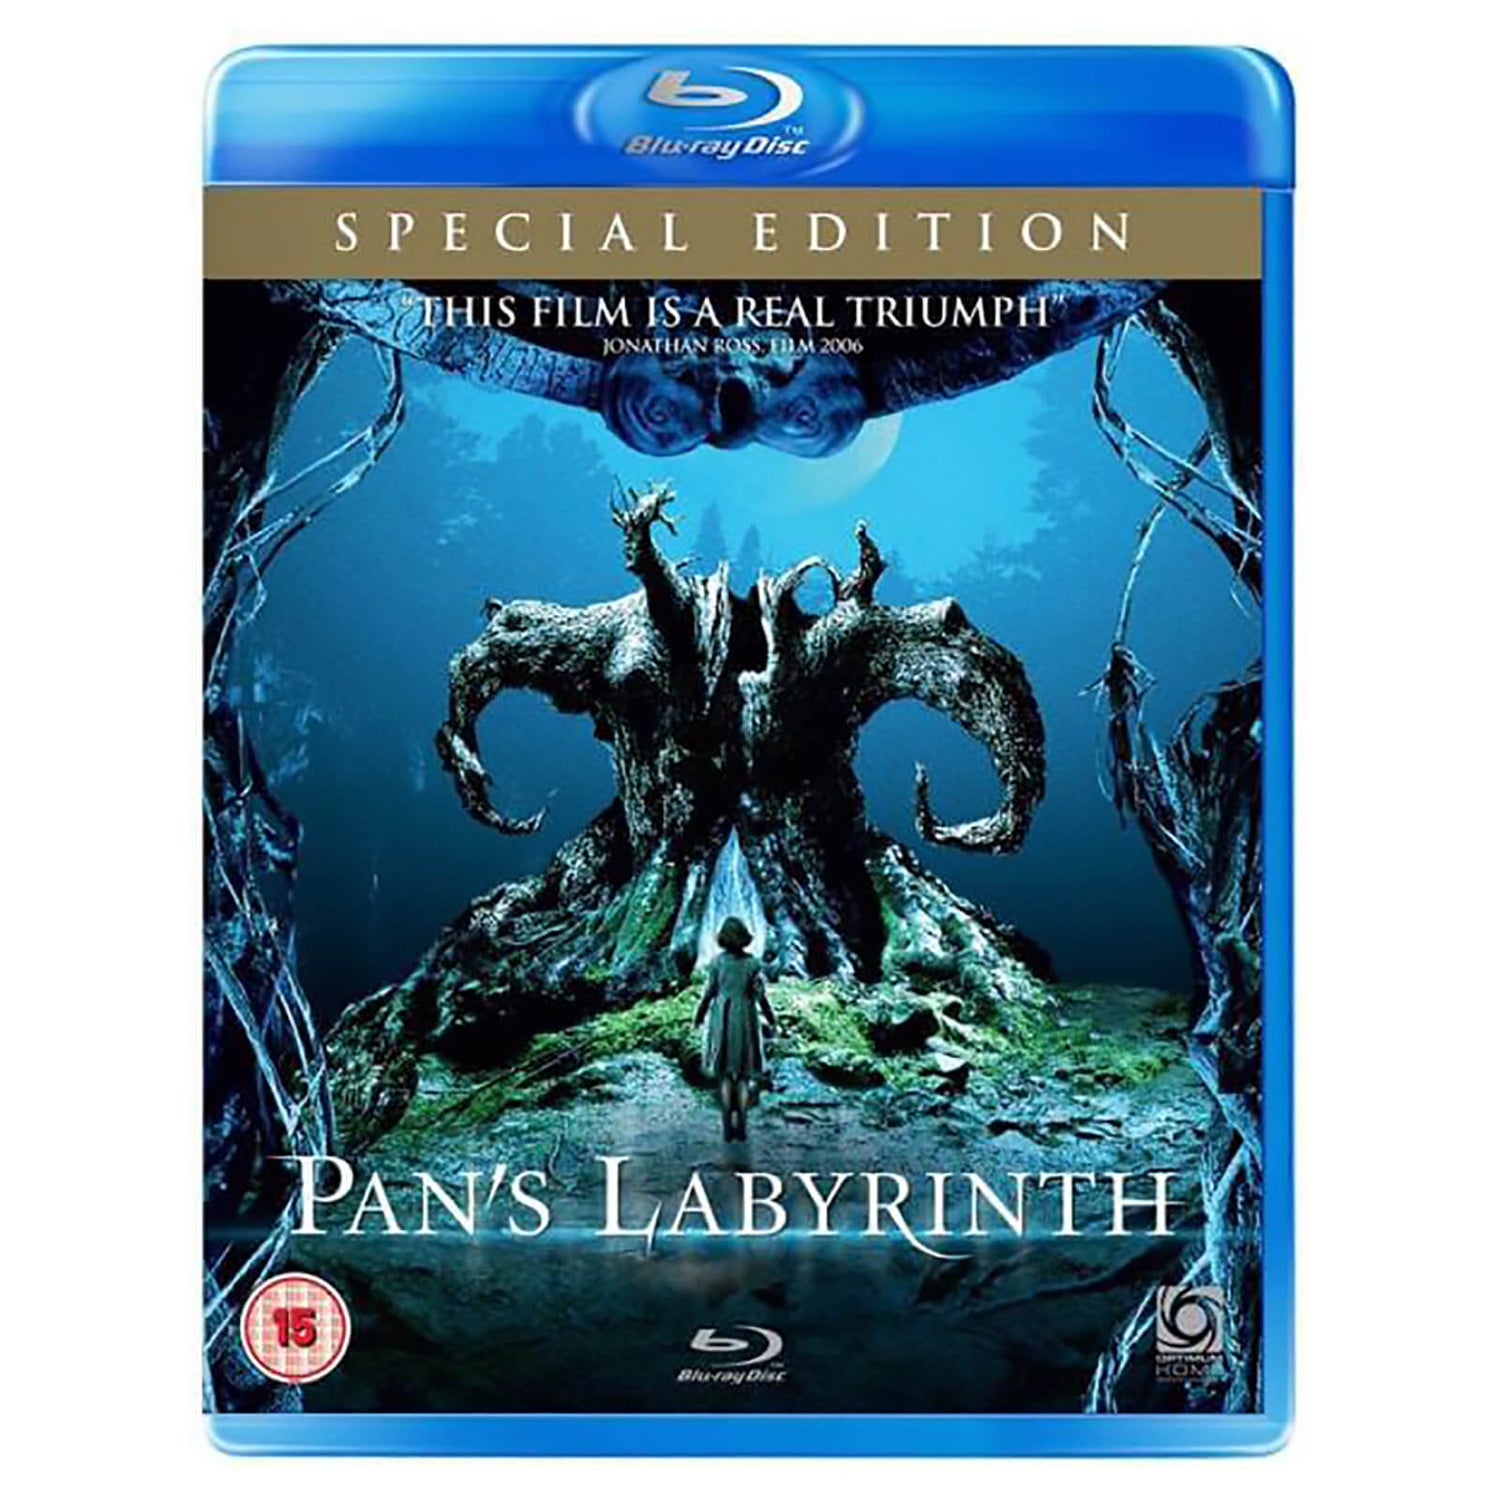 Pan's Labyrinth: Special Edition